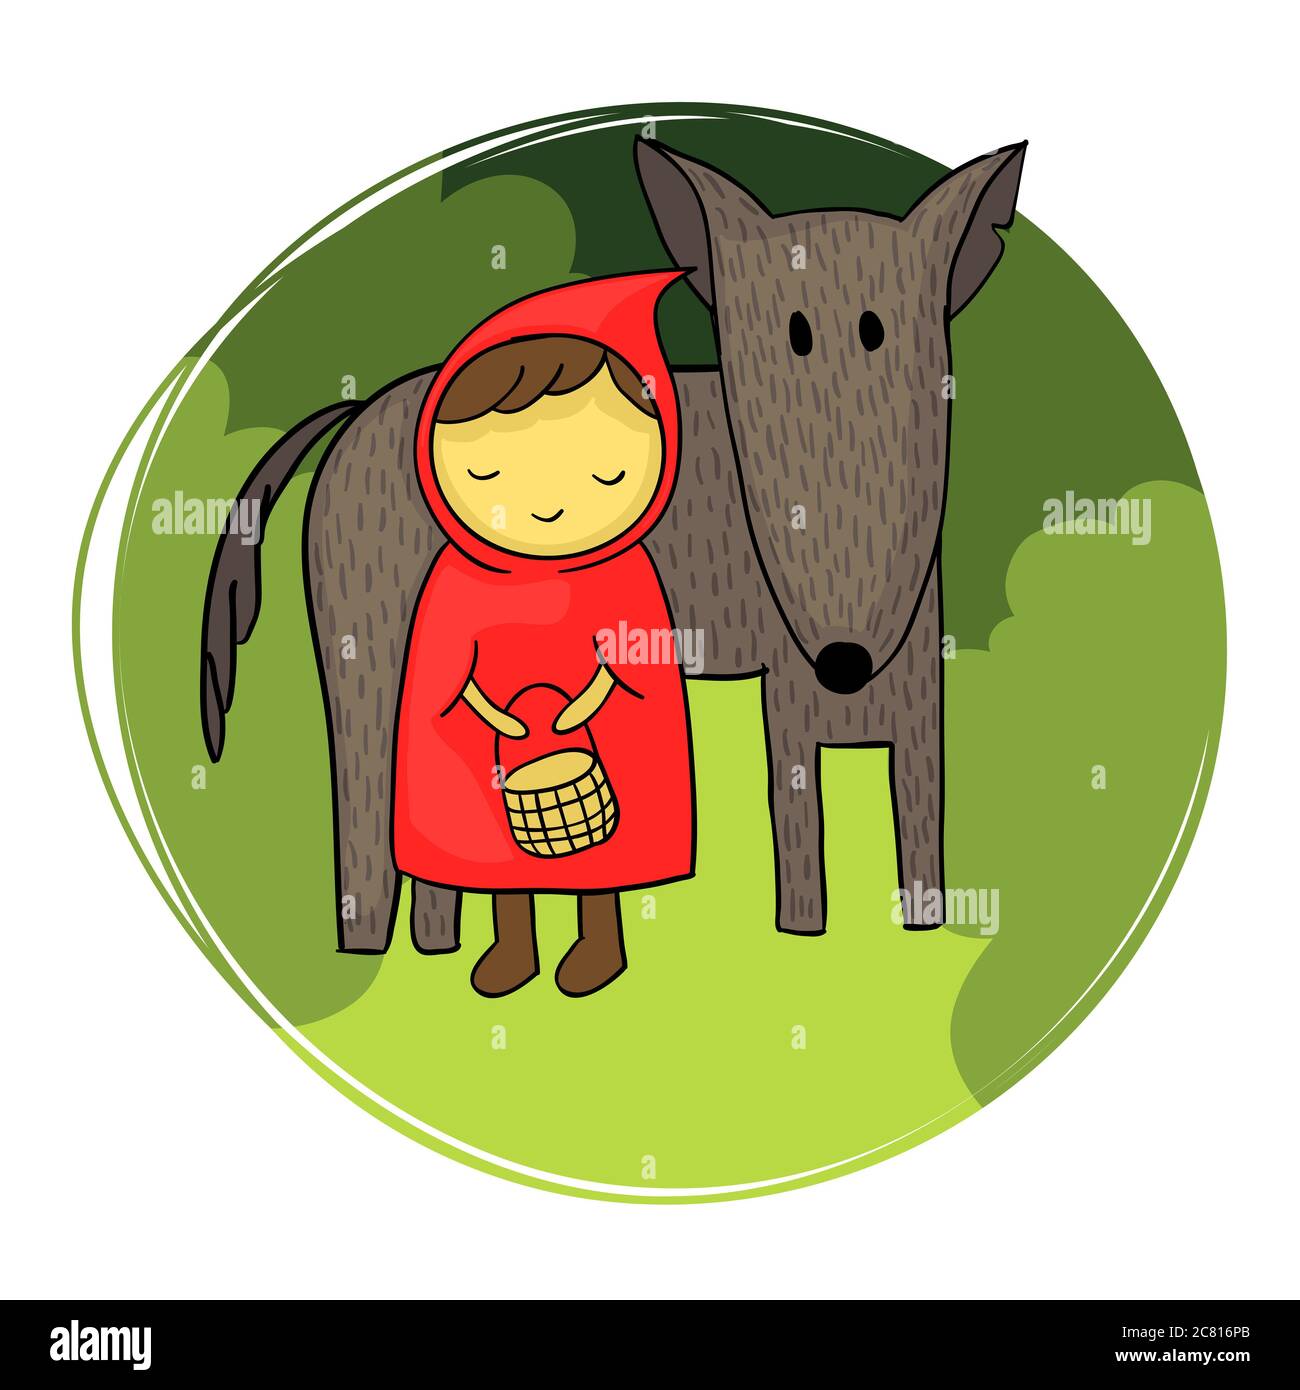 Cute and naive illustration of Little Red Riding Hood and the big bad wolf. Stock Photo